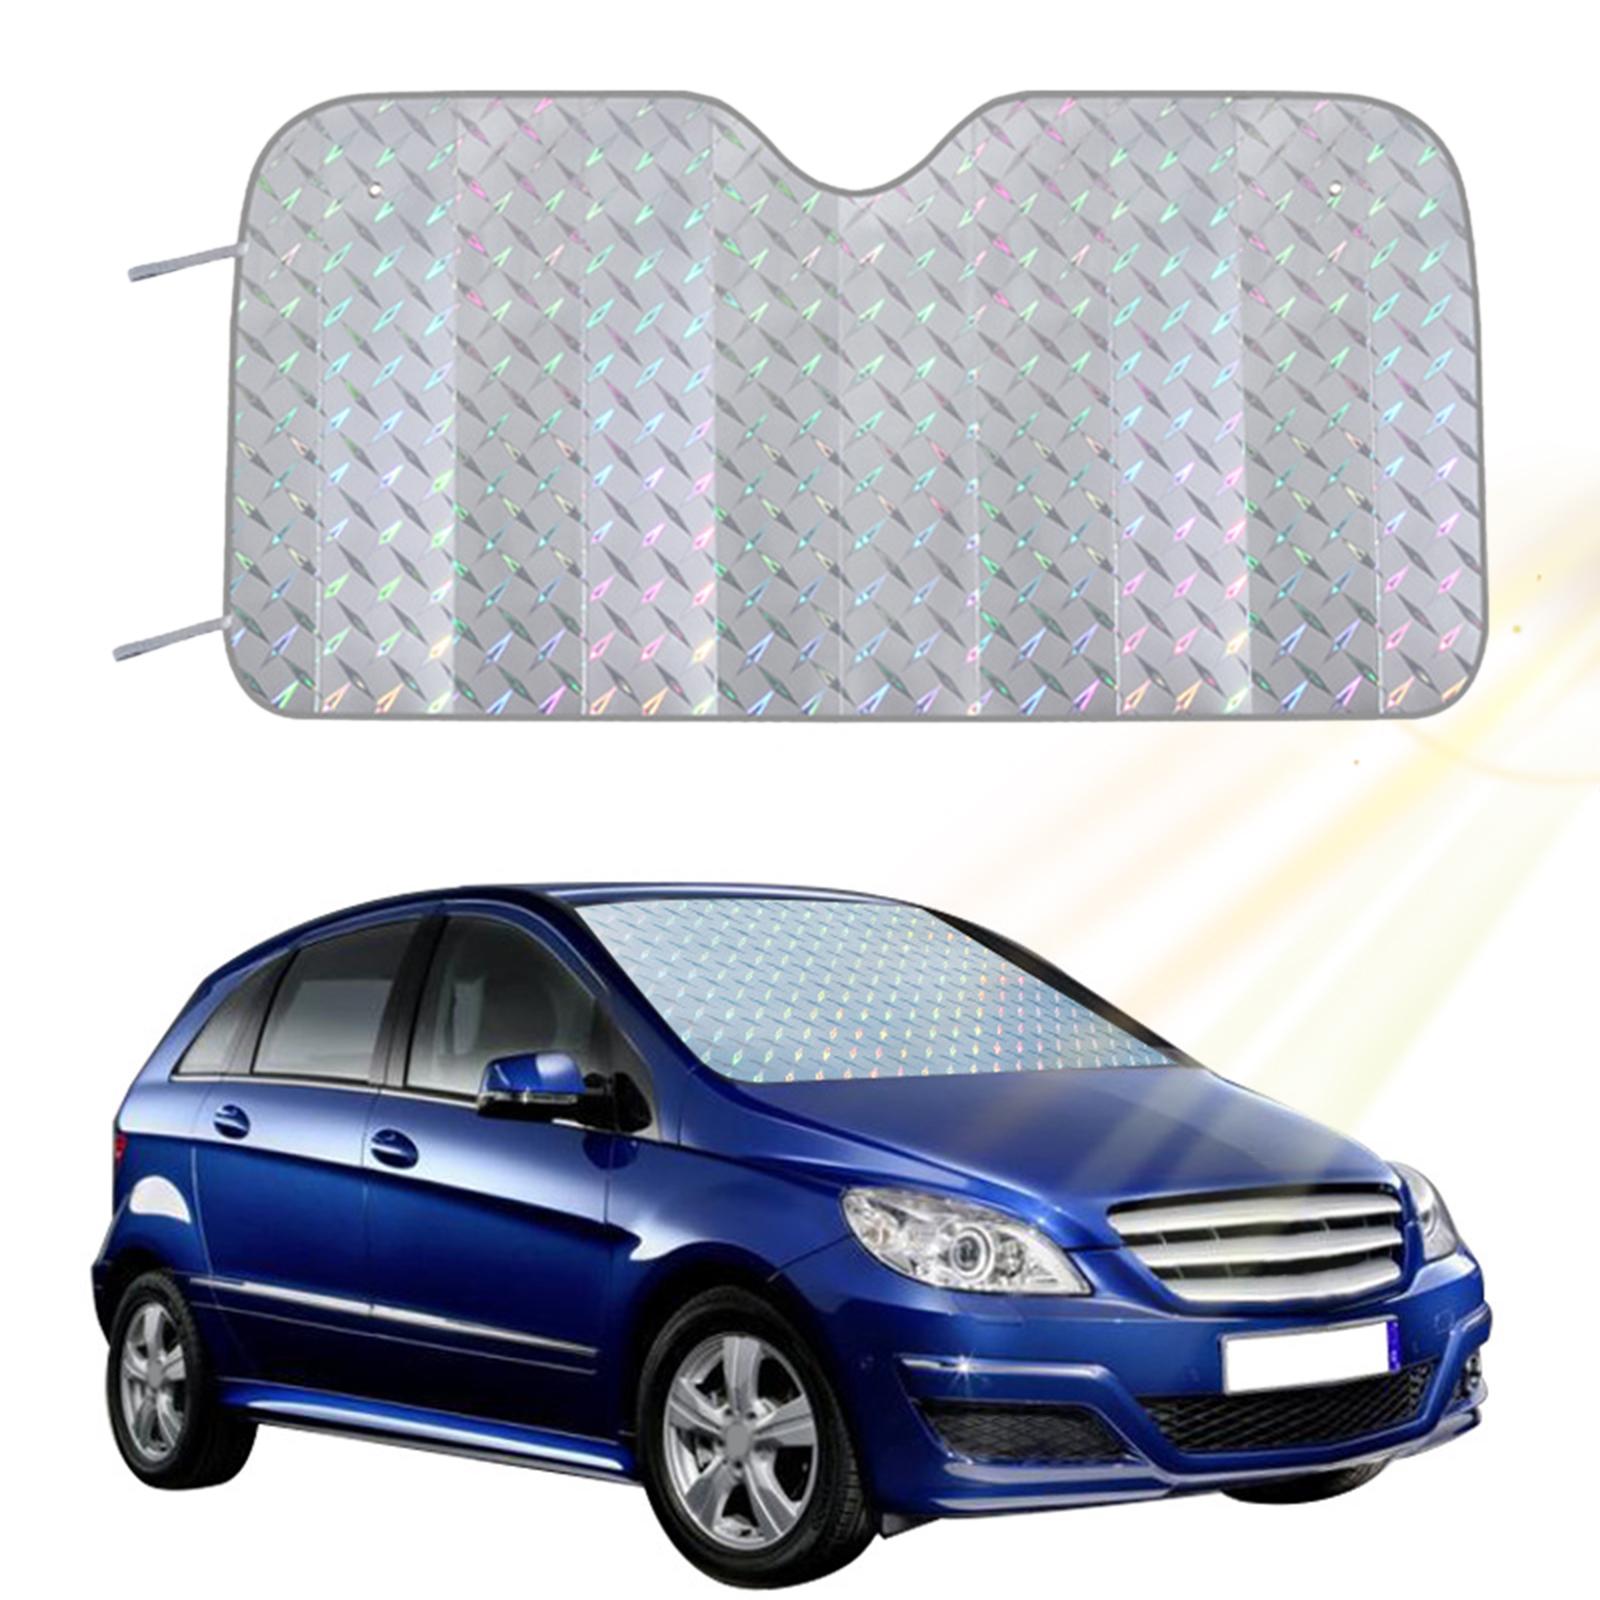 Car Windshield Sunshade Sun Protection Car Parts Save Space Windshield Cover 140cmx70cm